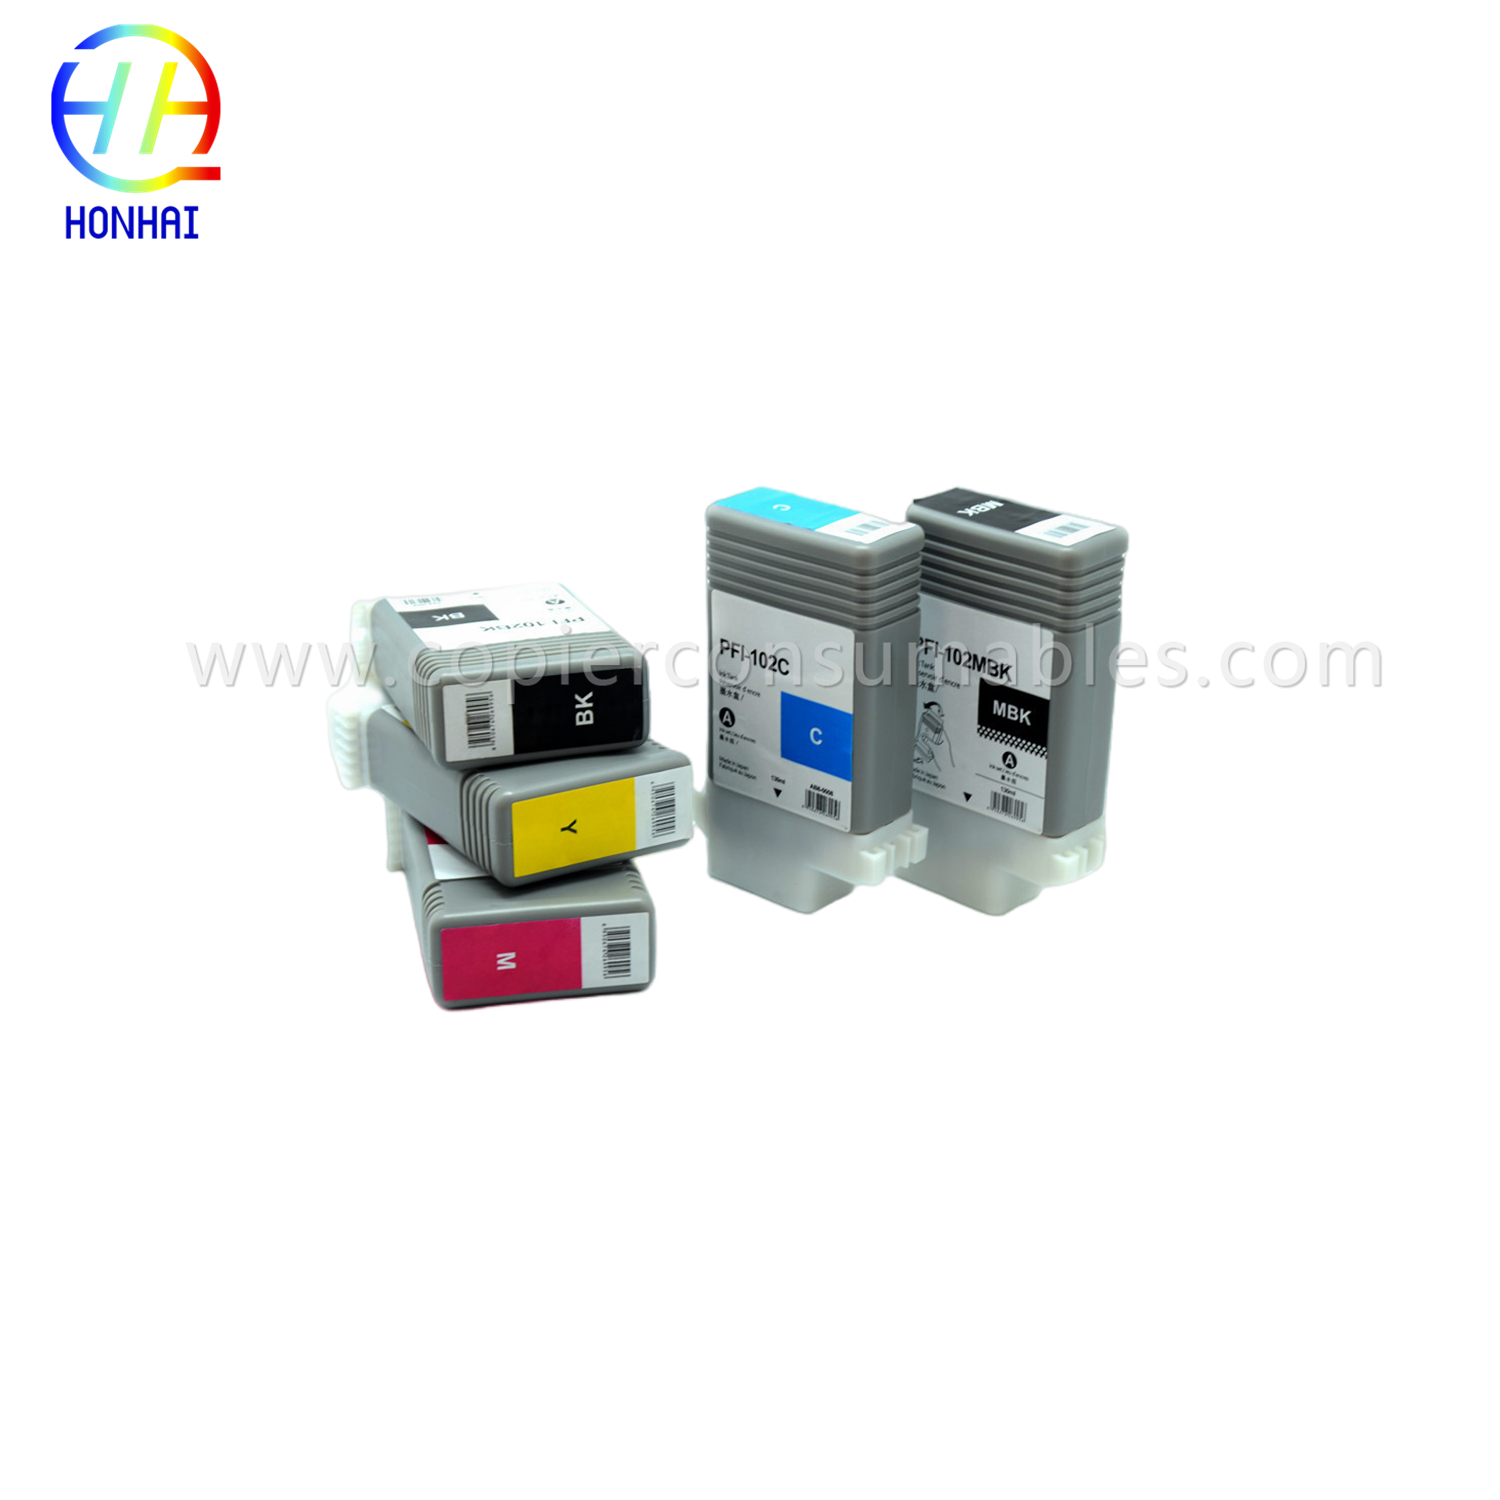 Ink Cartridge for Canon Image Prograf Ipf500 Ipf510 Ipf600 Ipf605 Ipf610 Ipf650 Ipf655 Ipf700 Ipf710 Ipf720 Ipf750 Ipf755 Ipf760 Ipf765